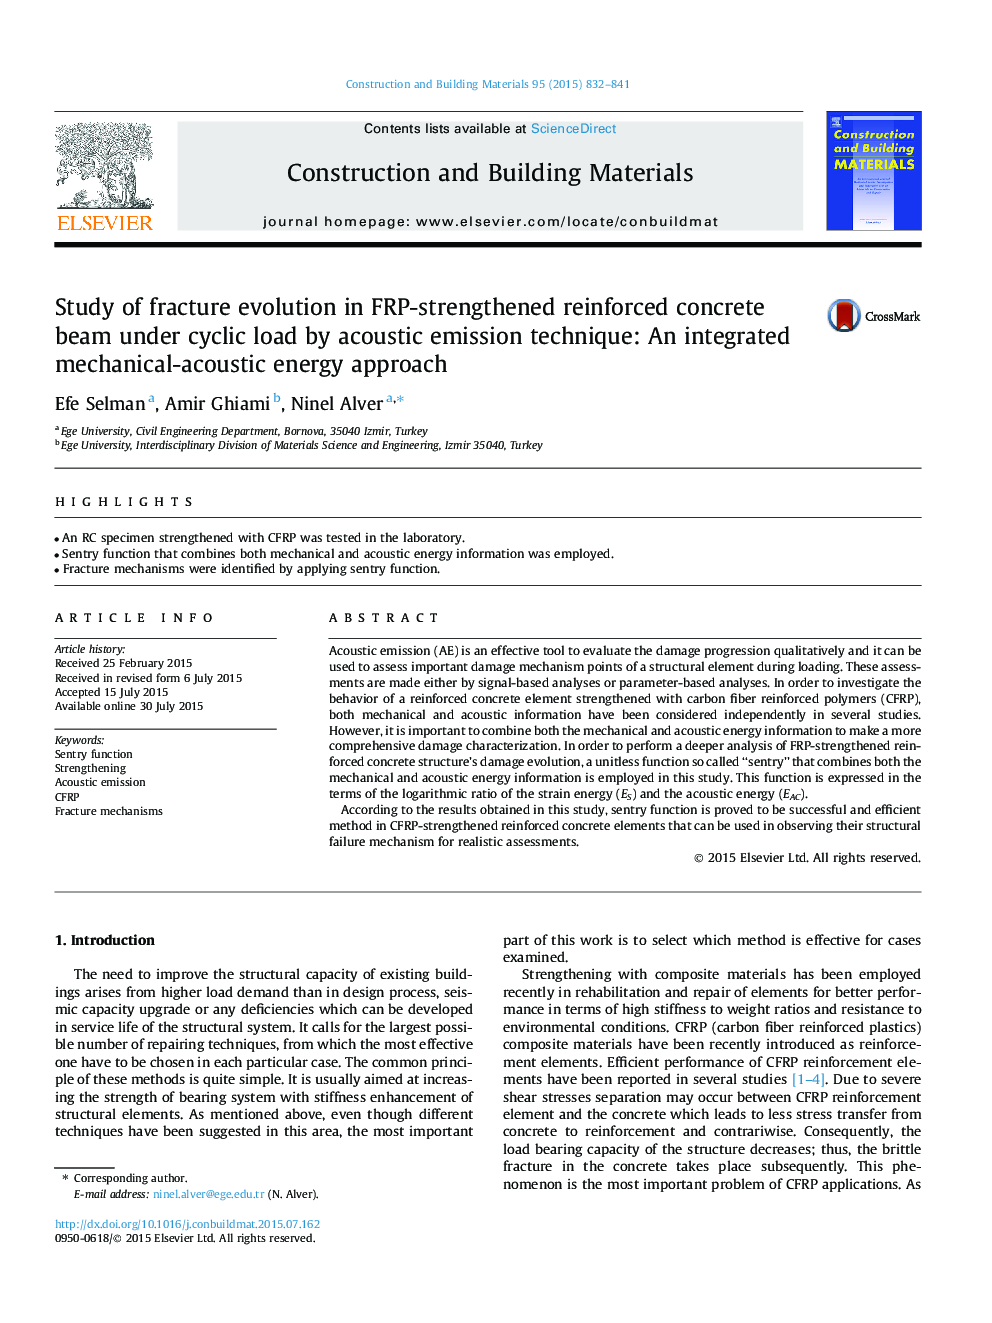 Study of fracture evolution in FRP-strengthened reinforced concrete beam under cyclic load by acoustic emission technique: An integrated mechanical-acoustic energy approach